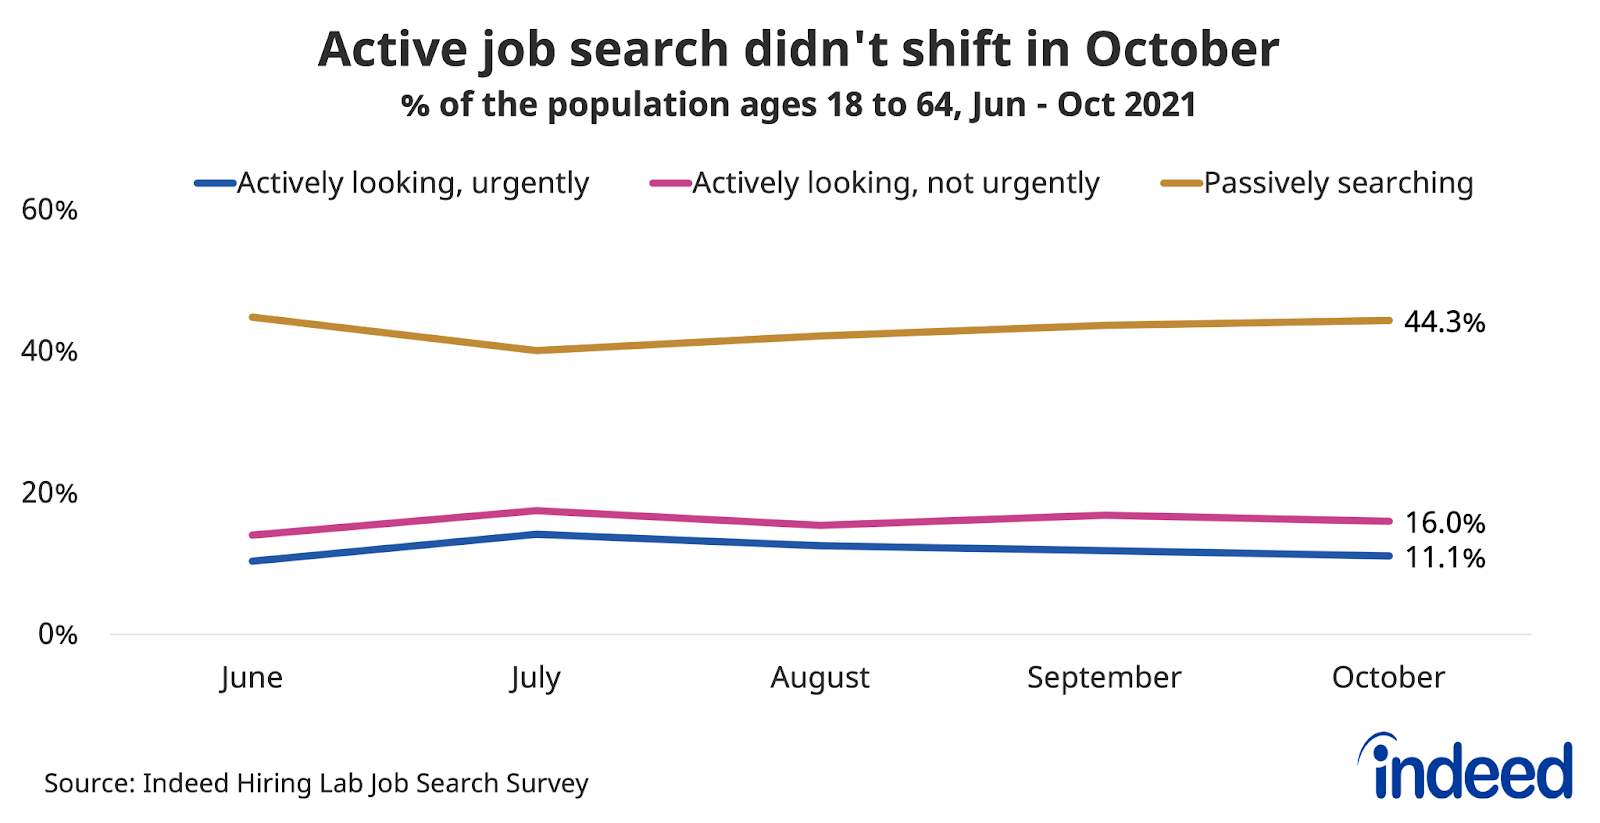 Line chart titled “Active job search didn’t shift in October.”